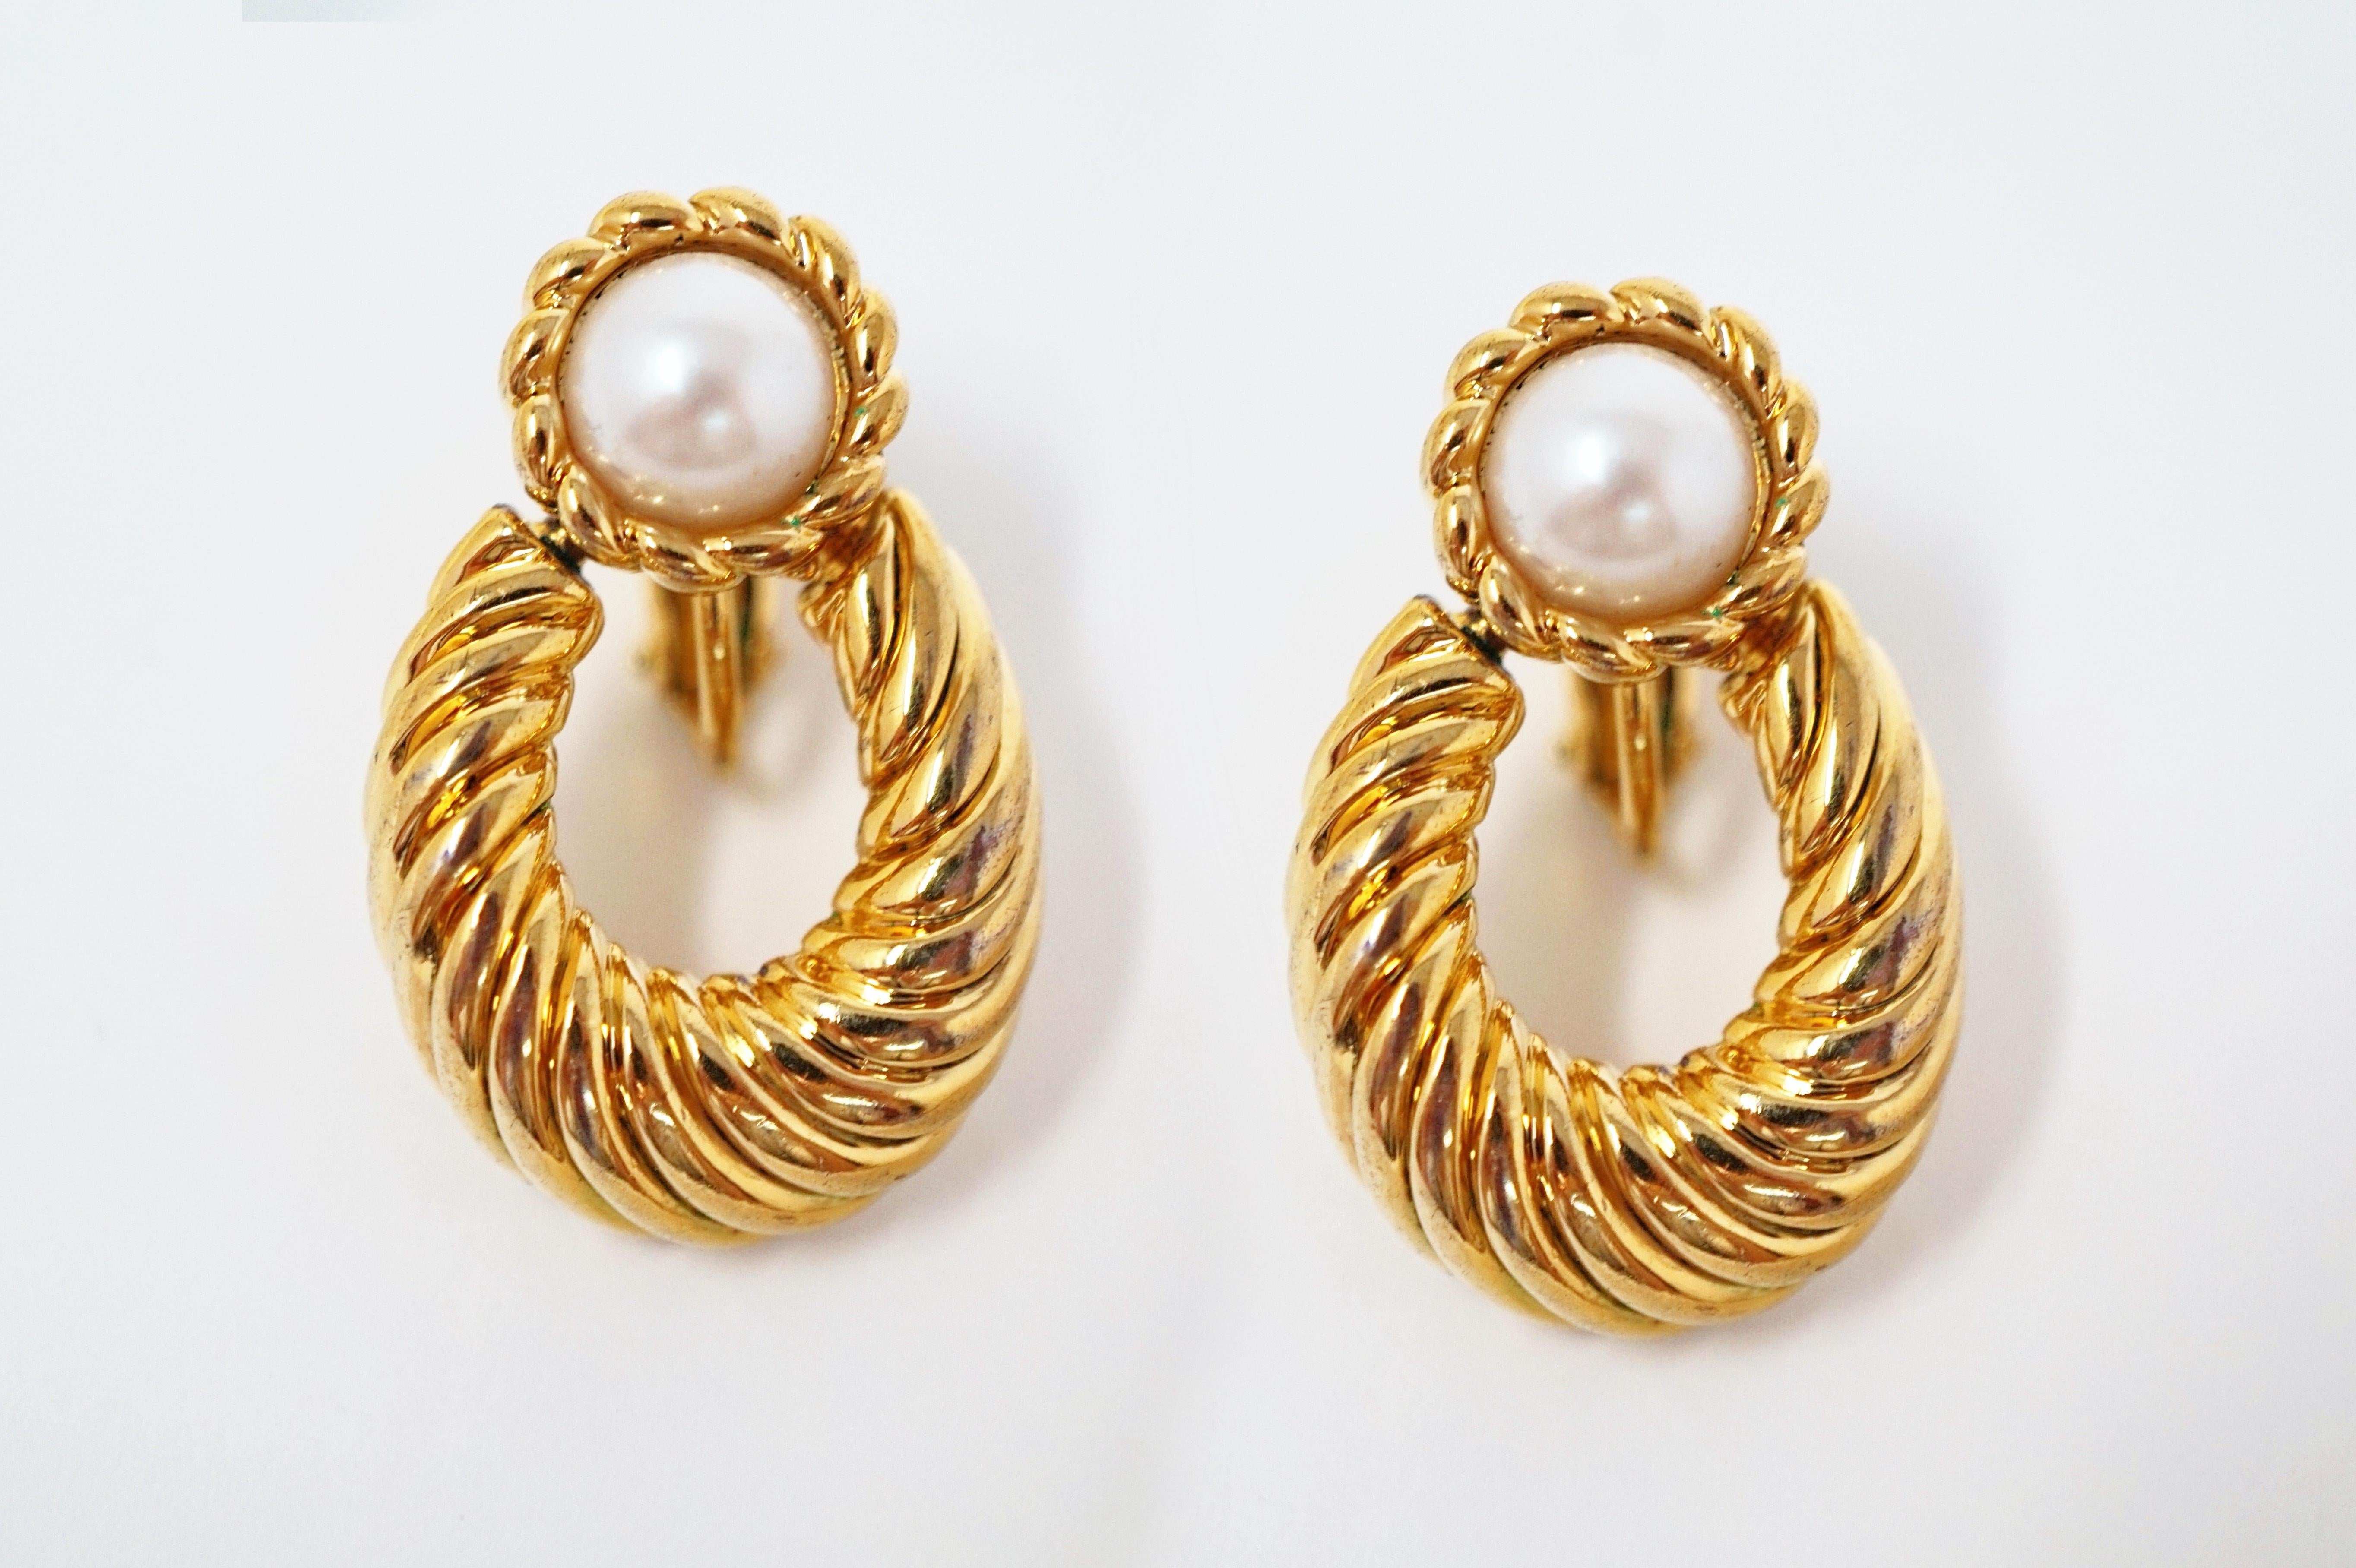 Vintage Napier Gilded Door Knocker Earrings with Pearl, Signed For 